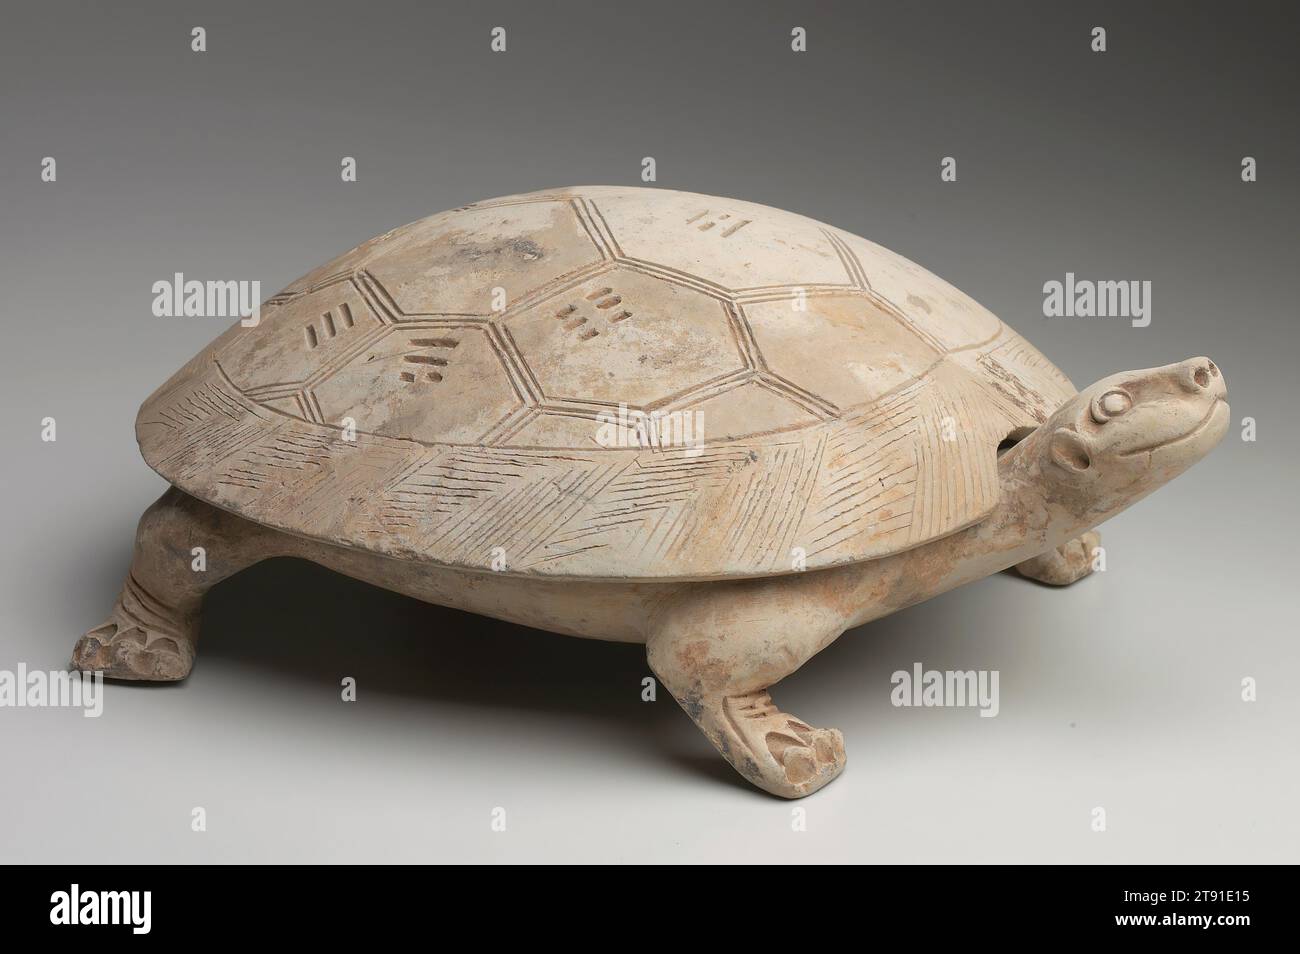 Ink tablet in the form of a turtle, 1st century, 10 x 4 x 4 in. (25.4 x 10.16 x 10.16 cm), Earthenware with modeled and incised decor including the Eight Trigrams of the I-Ching (The Book of Changes), China, 1st century, This charming Han dynasty (206 BCE - 220 CE) ink stone, modeled in the form of a turtle, features 'the eight trigrams' ba gua carved into the top of its removable shell. The eight trigrams are among the earliest and best-known images associated with Daoism. These visual symbols are the basis for the sixty-four hexagrams of the ancient divination text, the I-Qing Stock Photo